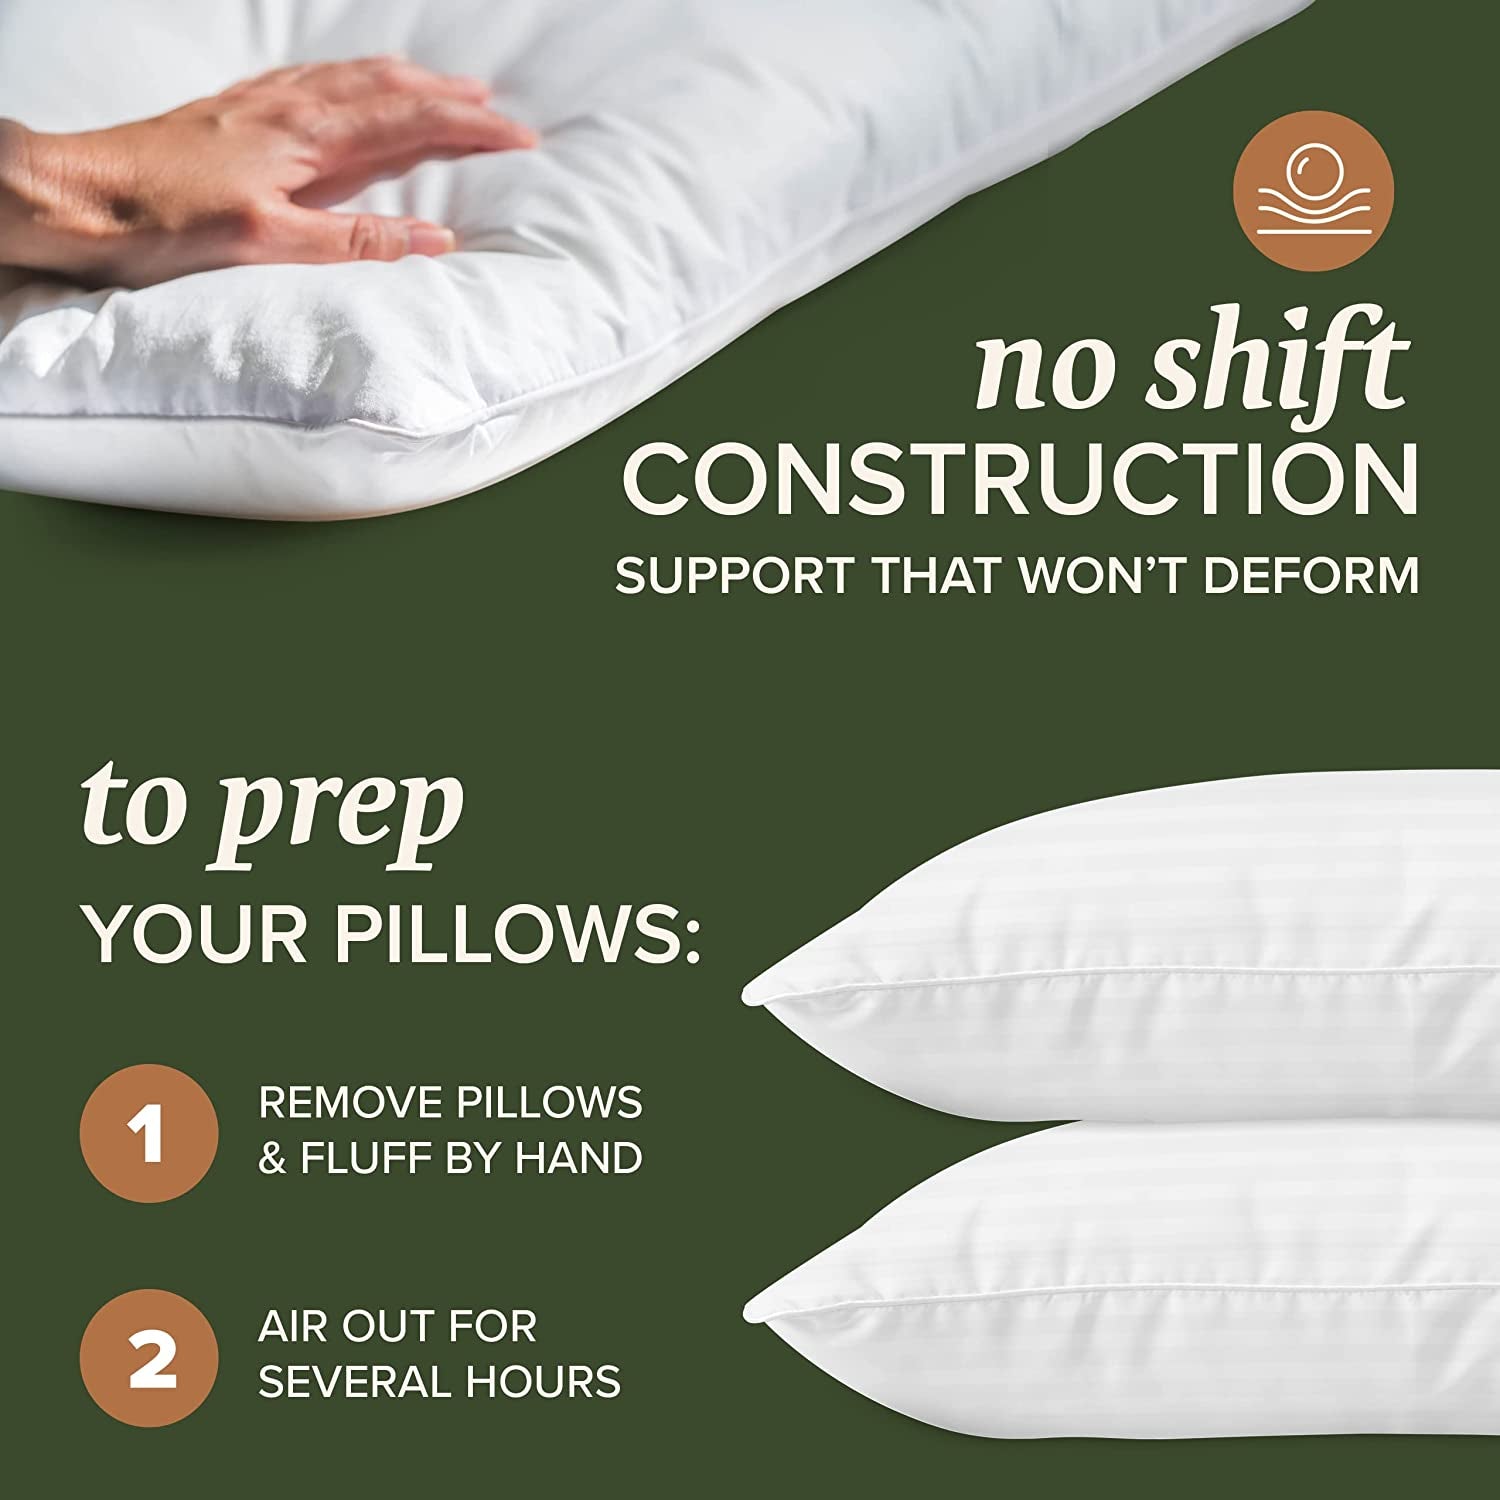 Bed Pillows Standard / Queen Size Set of 2 - down Alternative Bedding Gel Cooling Pillow for Back, Stomach or Side Sleepers